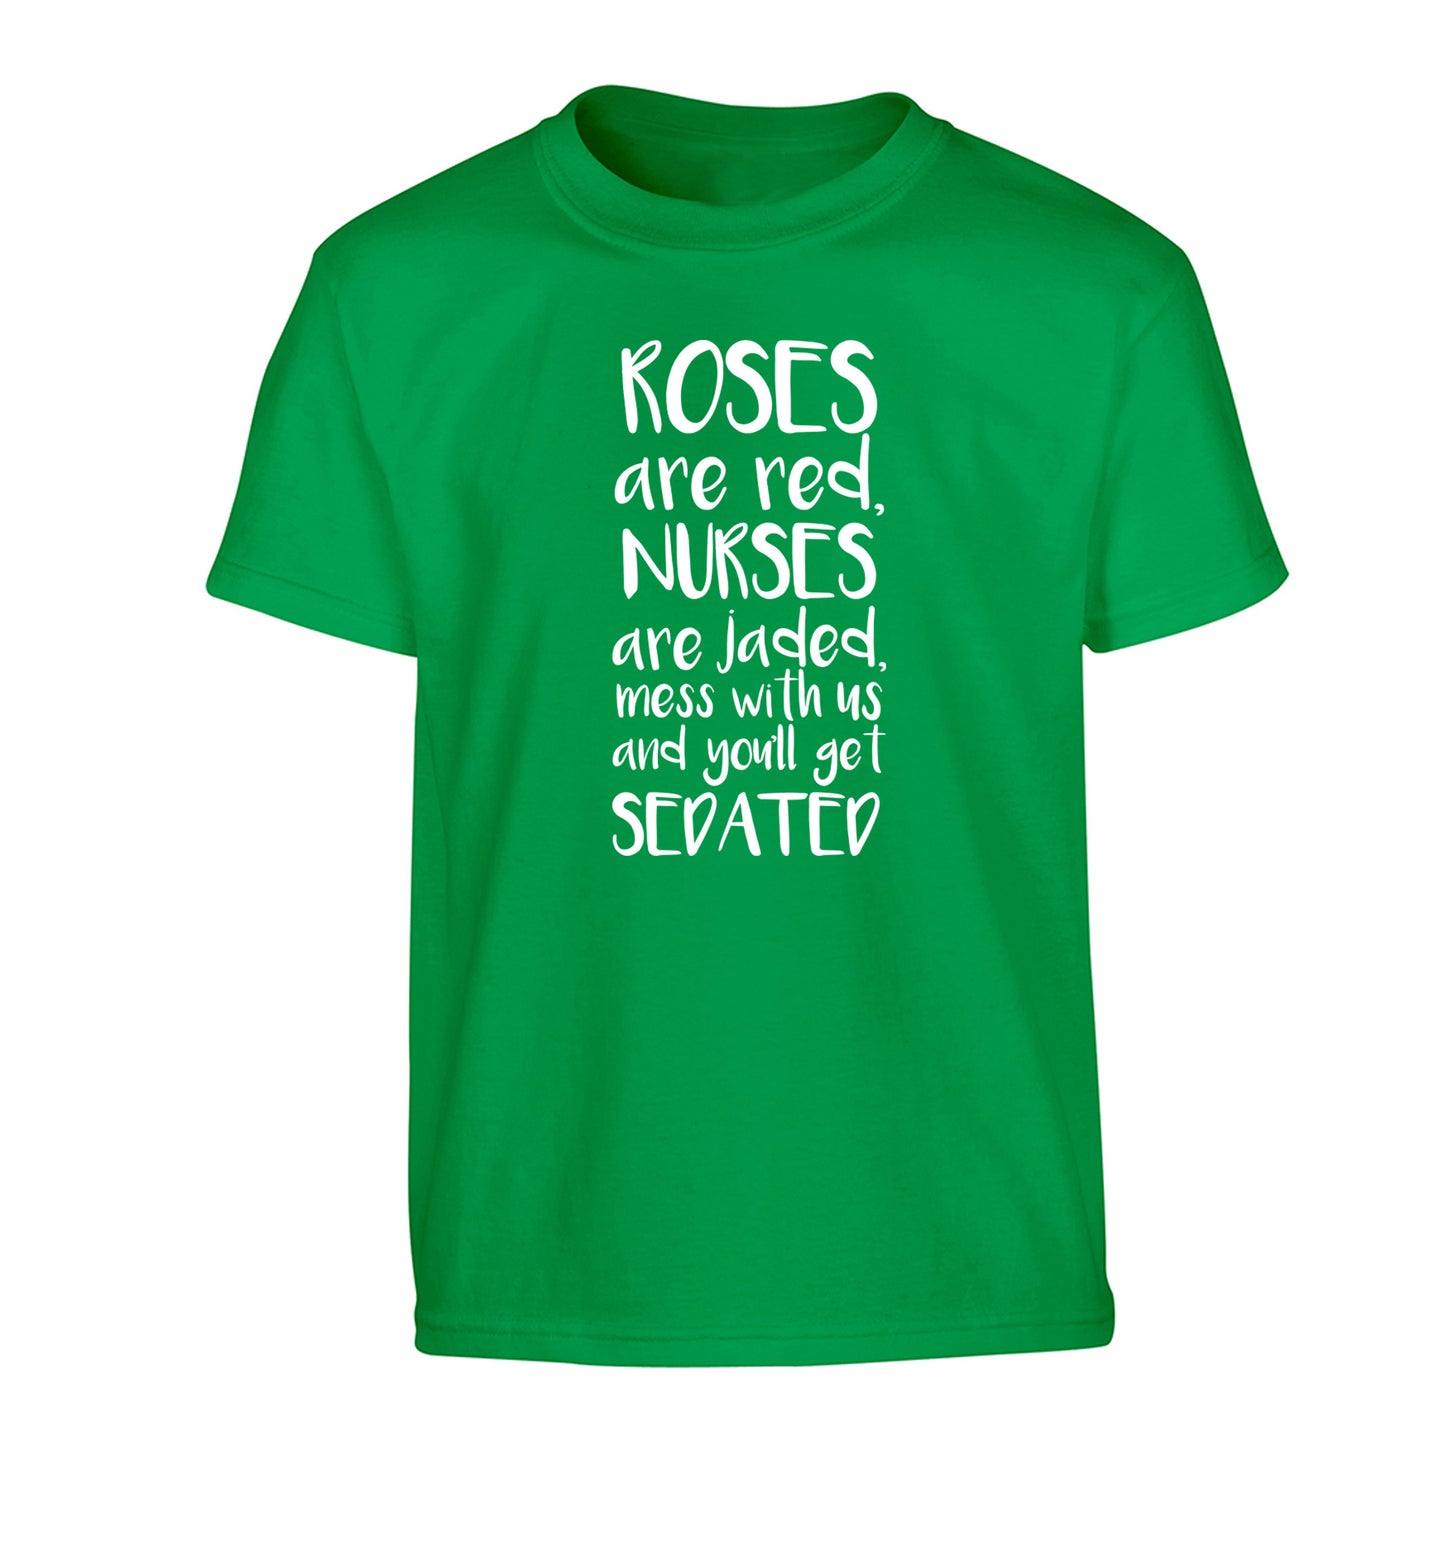 Roses are red, nurses are jaded, mess with us and you'll get sedated Children's green Tshirt 12-14 Years